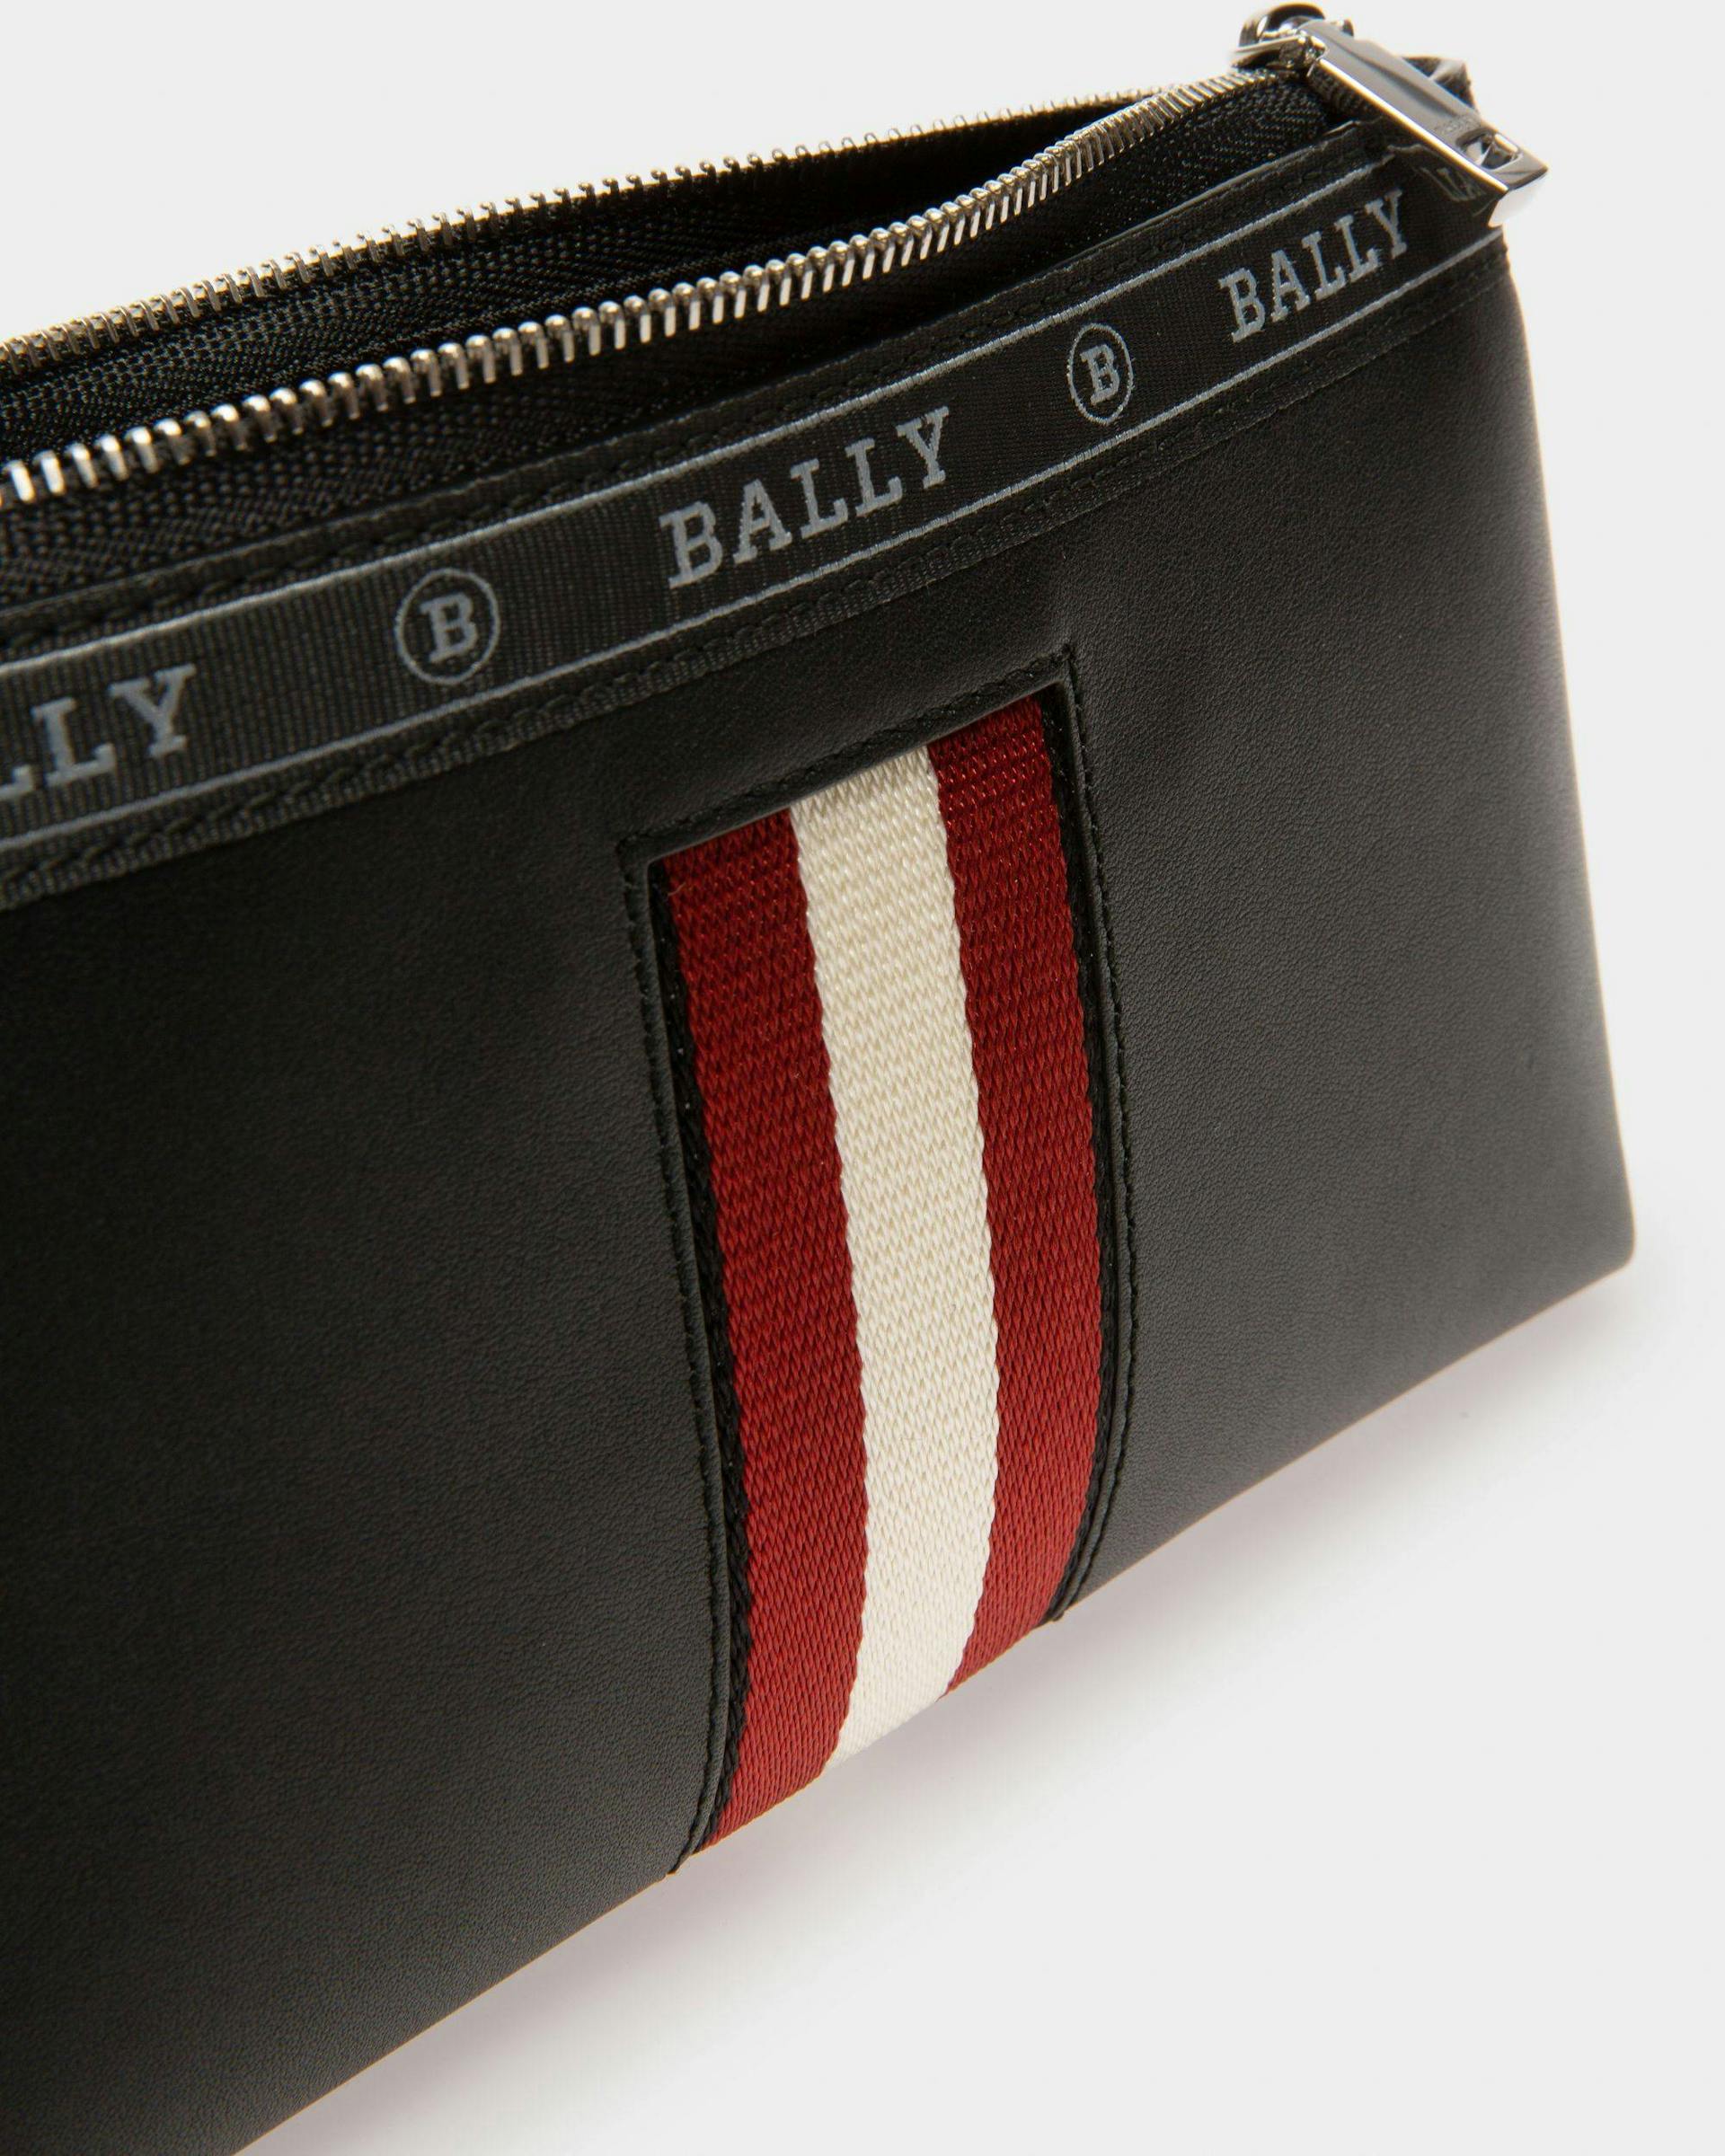 Beryer Leather Phone Wallet In Black - Homme - Bally - 04